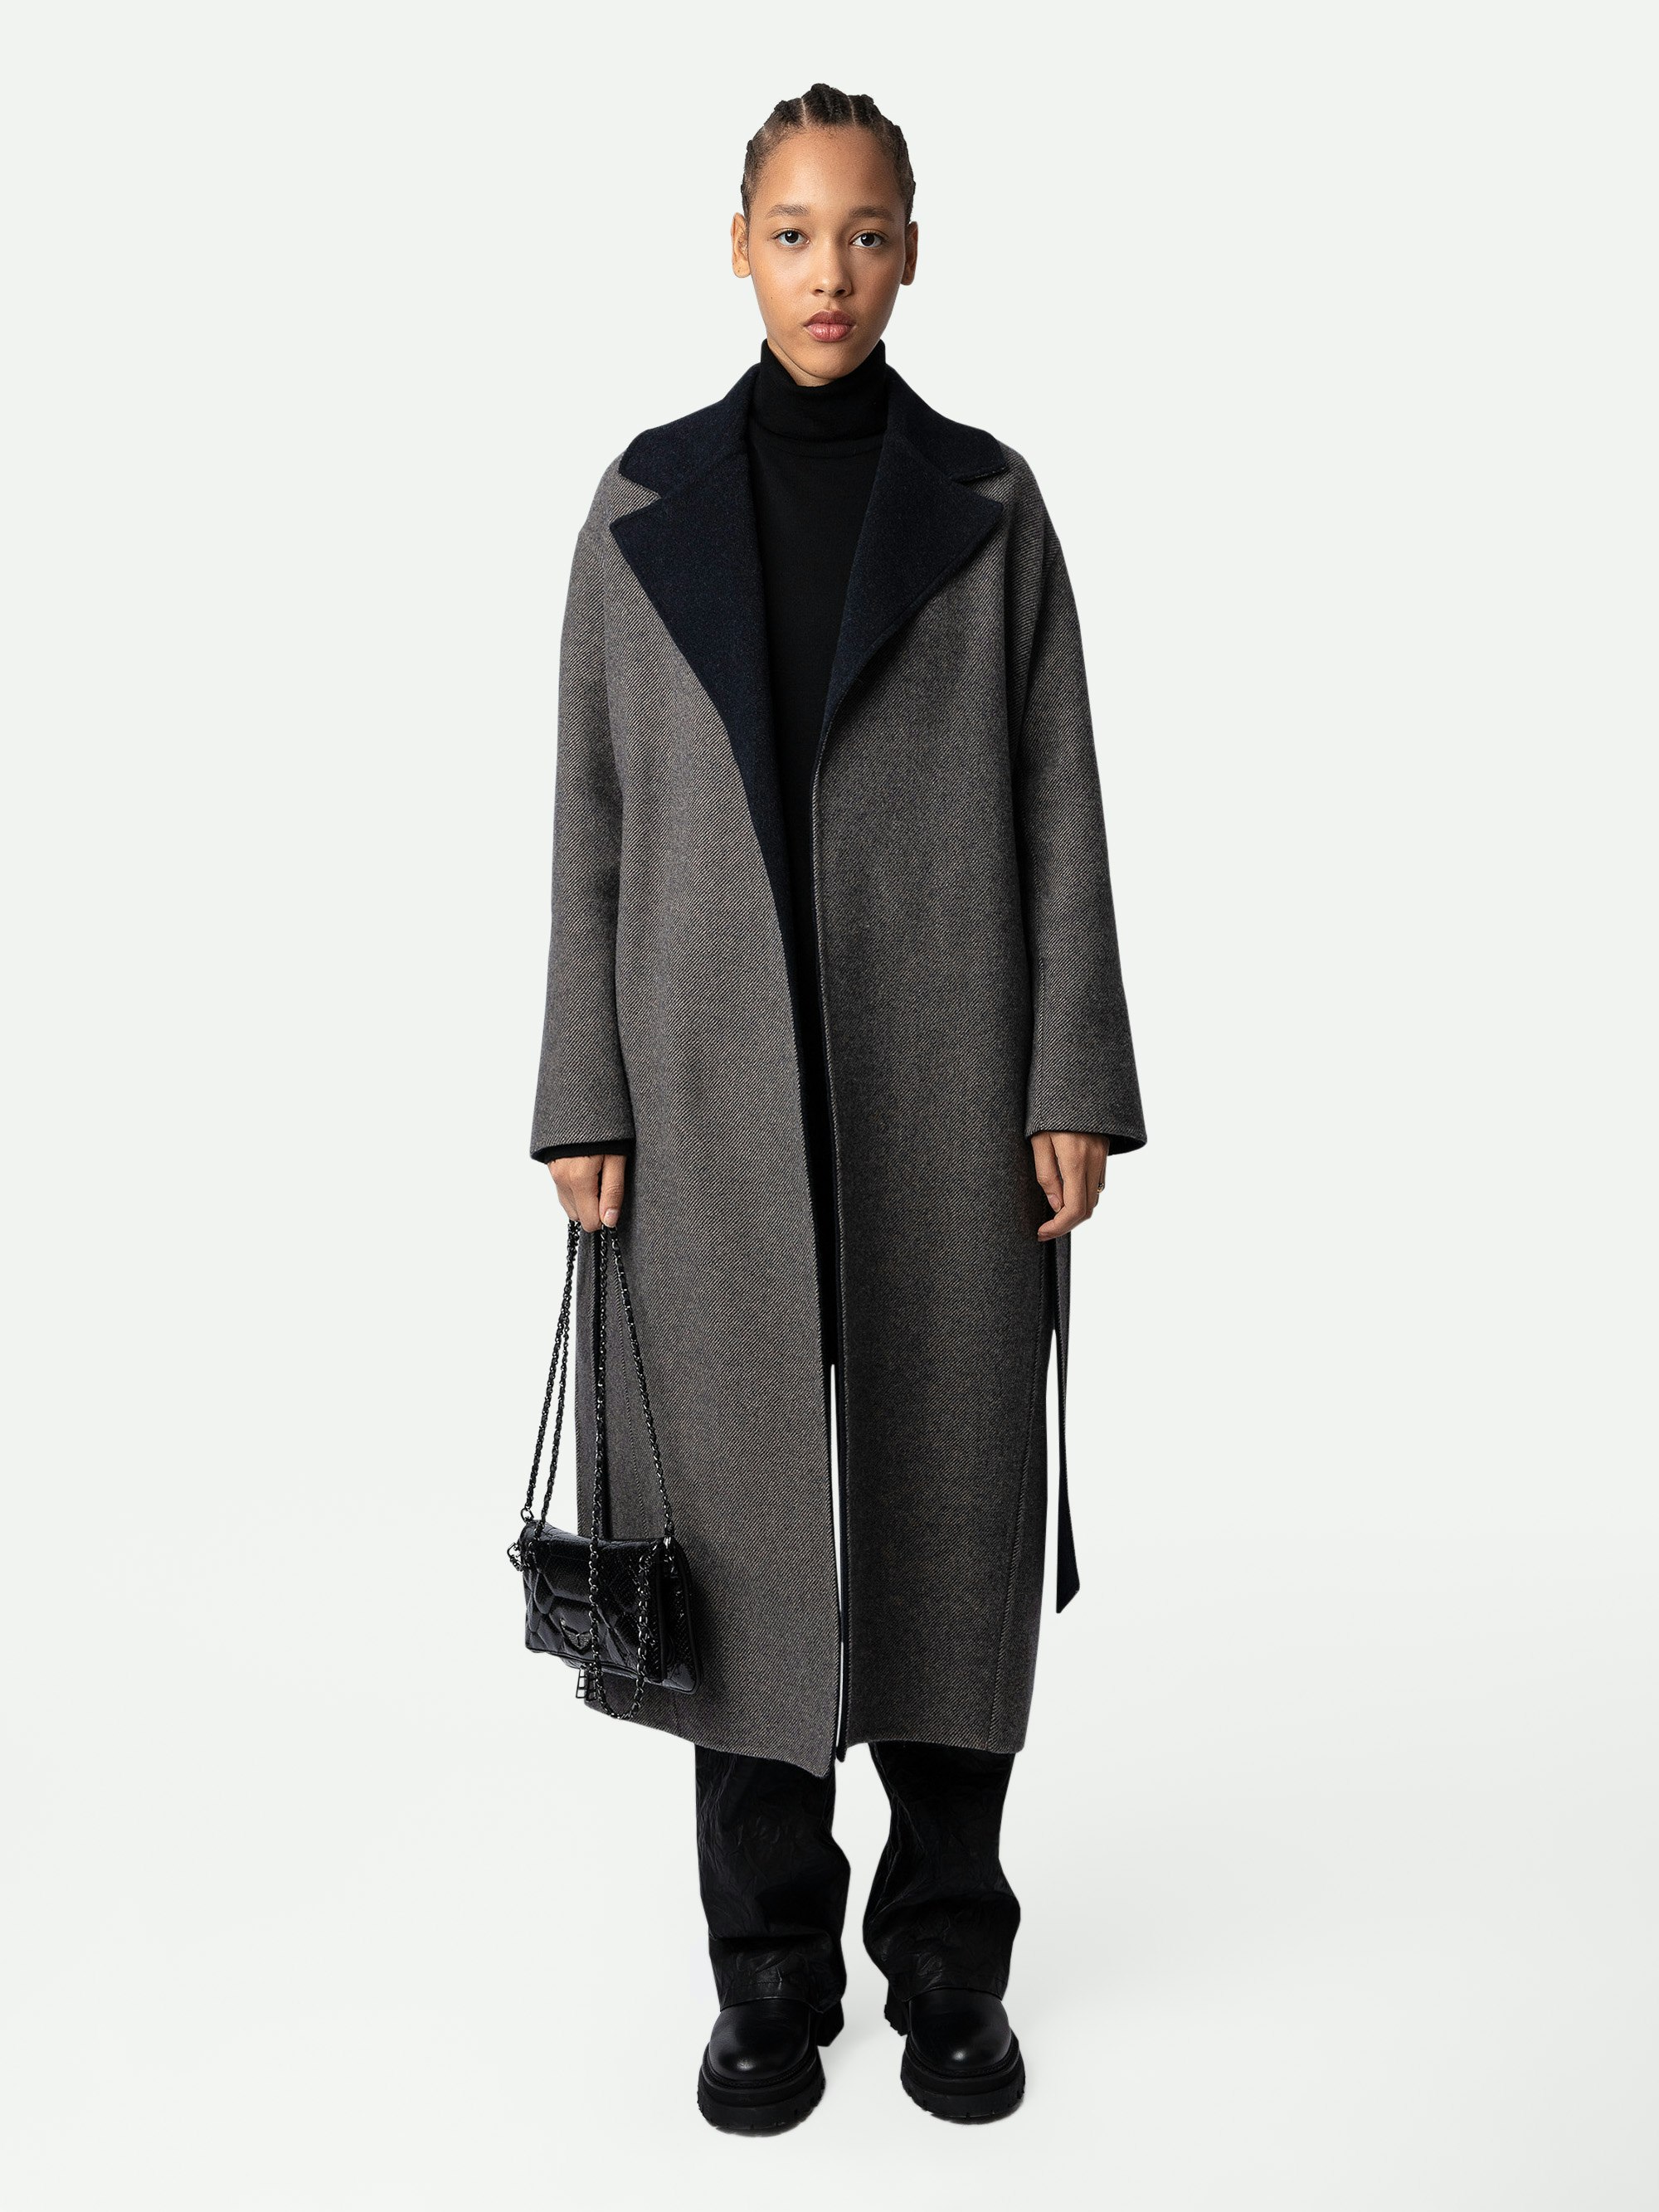 Meli Coat - Women’s long black wool belted coat with contrasting collar and wing motif on the back.